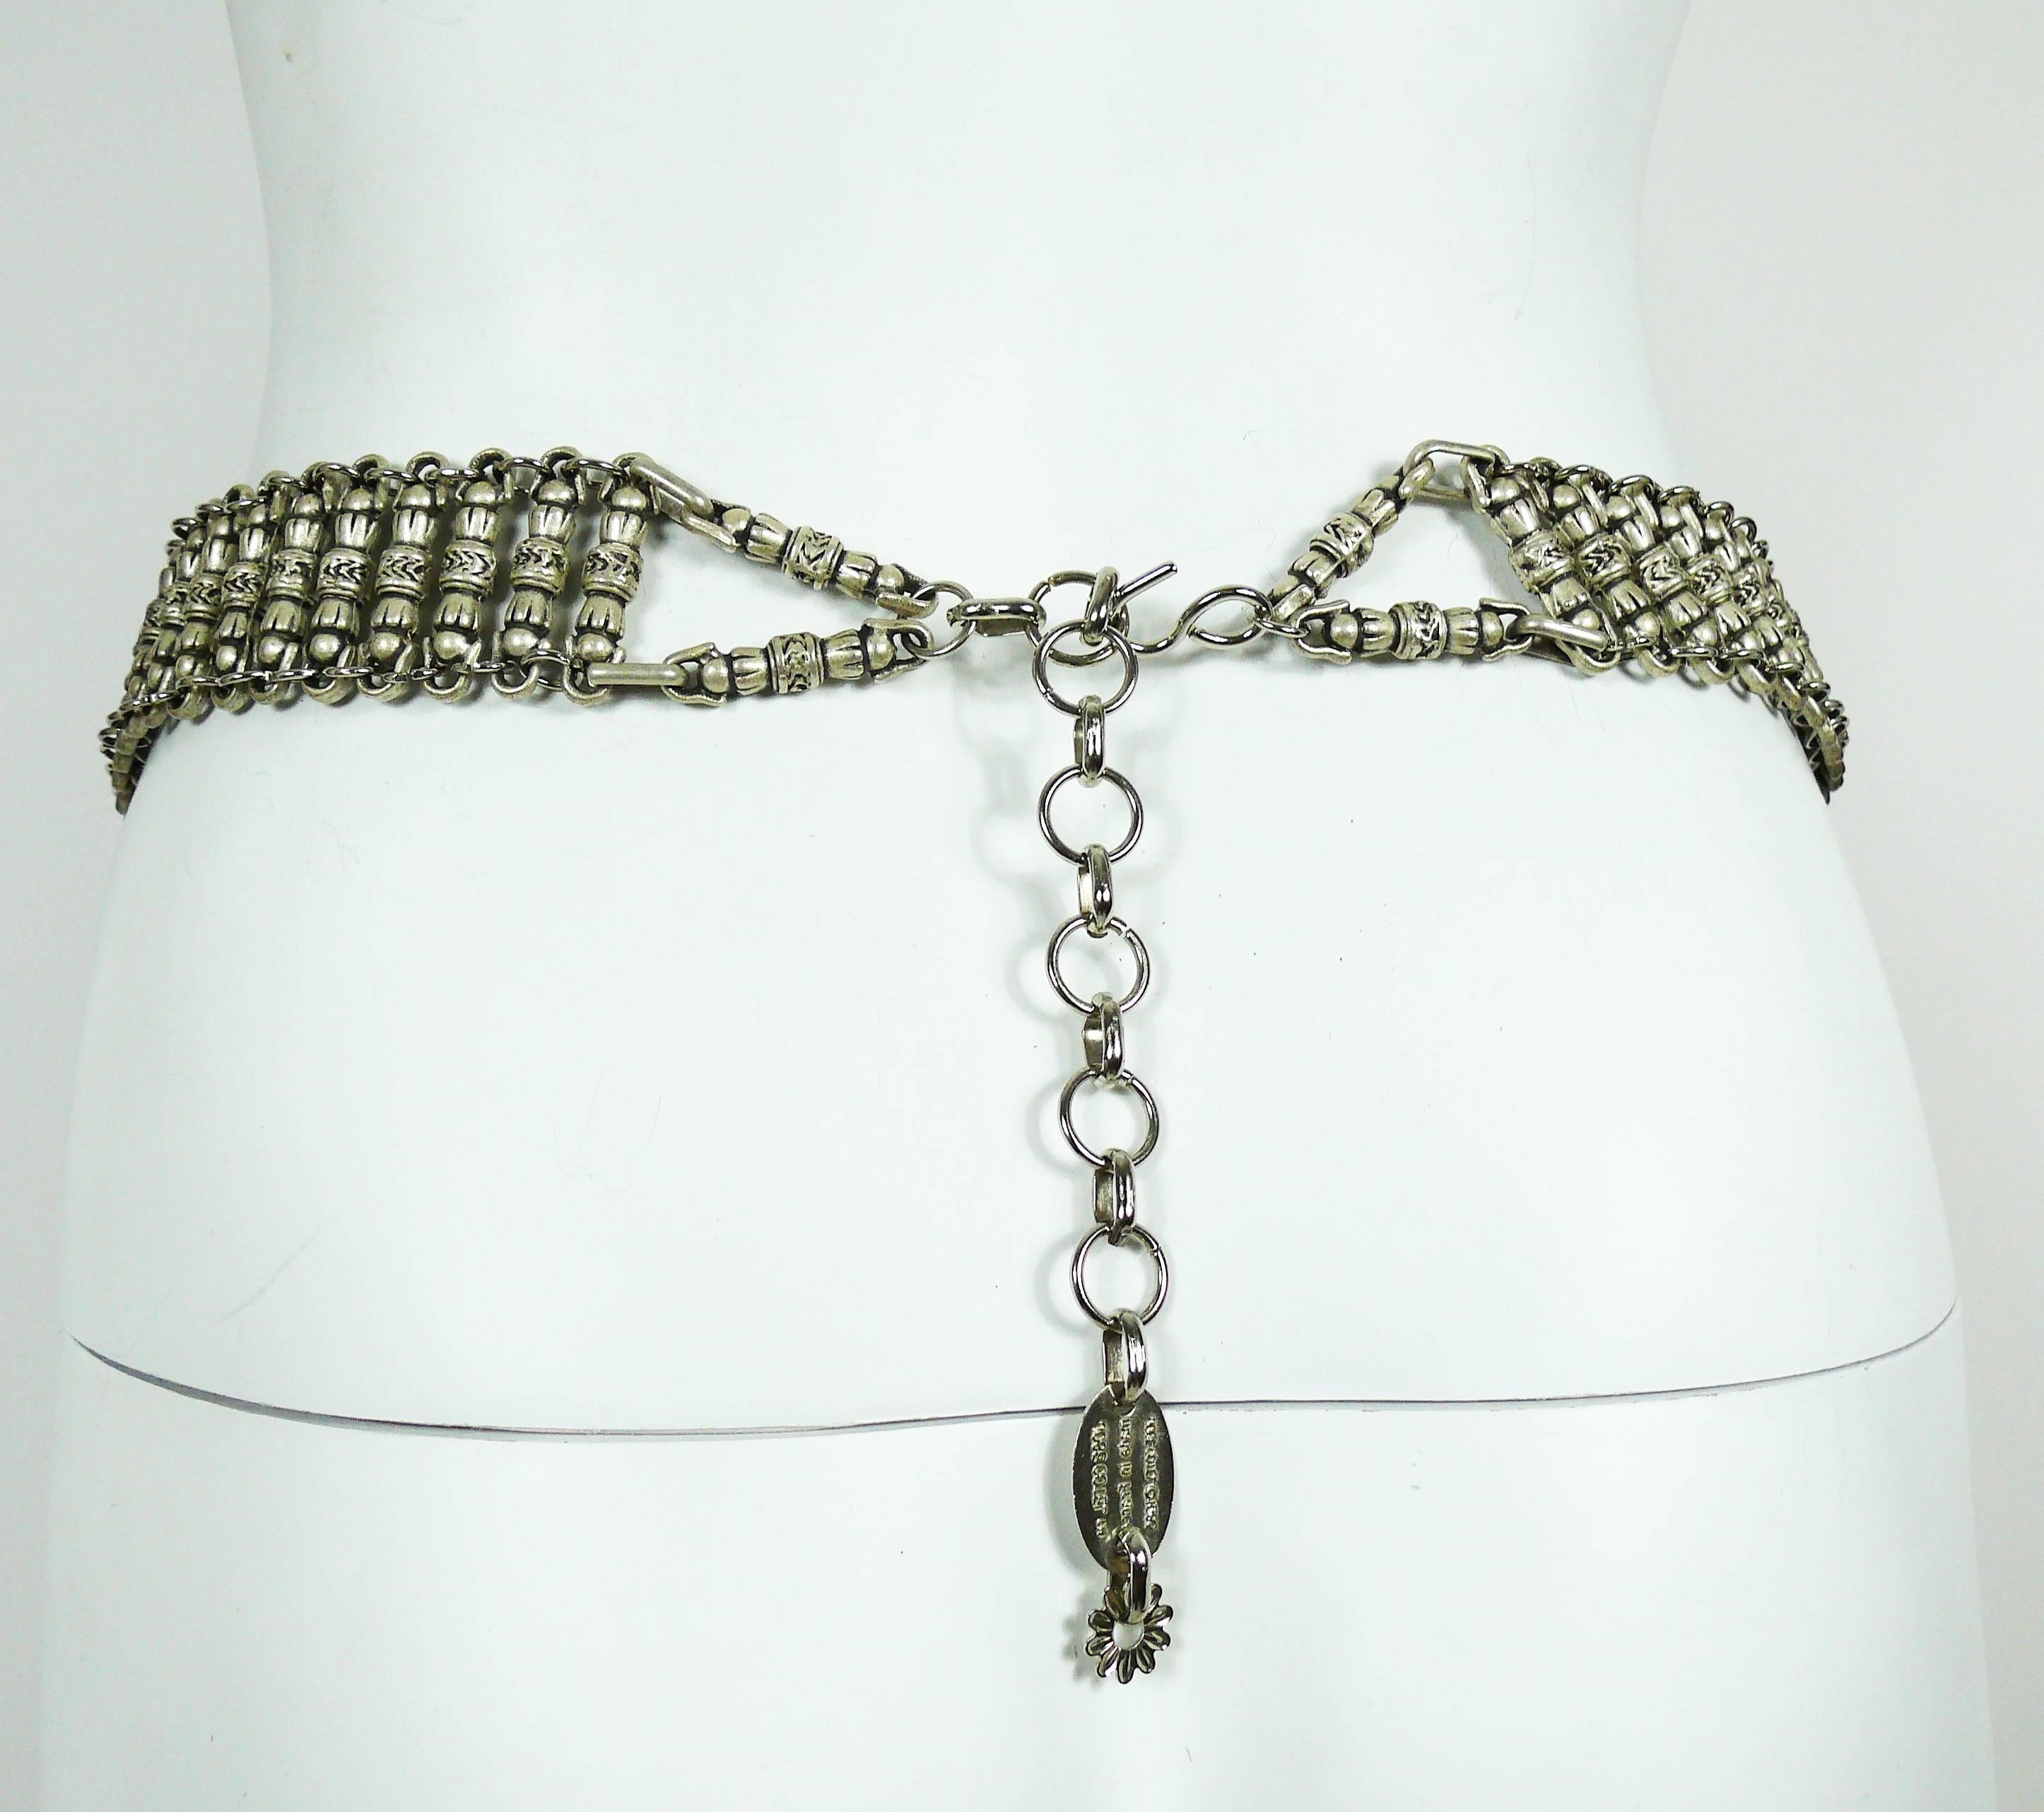 Jose Cotel Vintage 1985 Ethnic Inspired Belt Necklace with Claw Charms For Sale 9